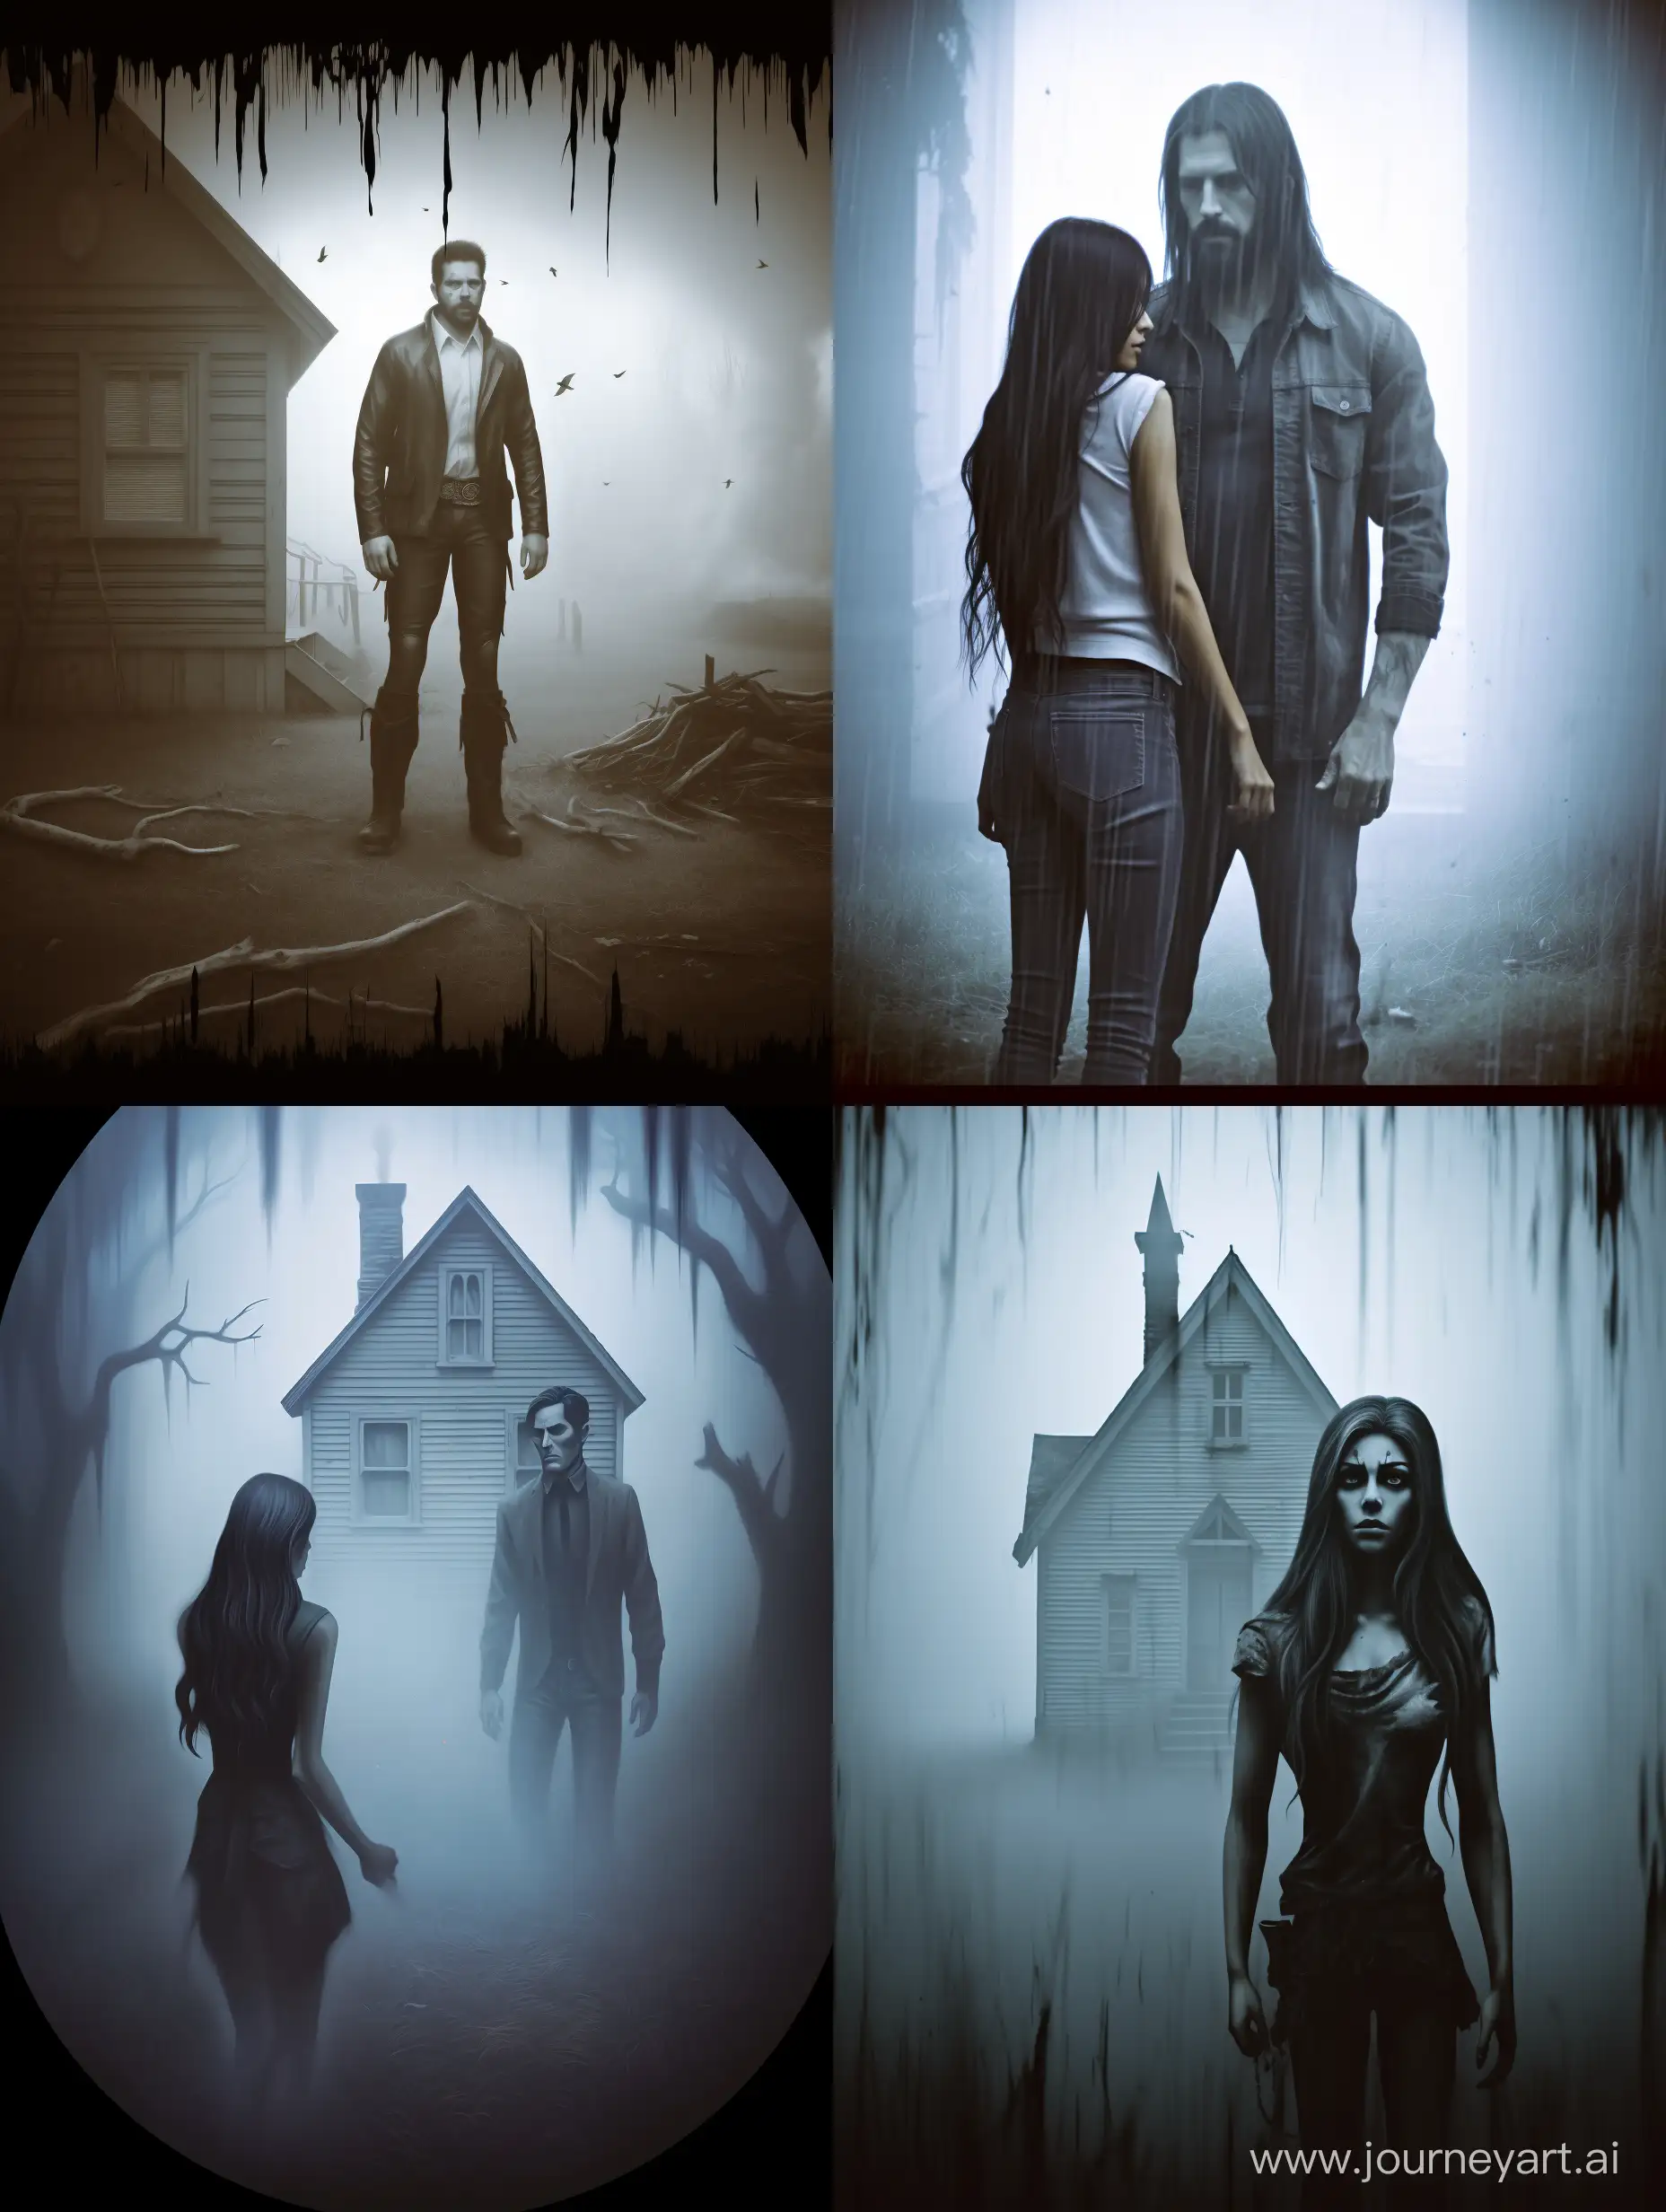 gorgeous young woman with black long straight hair gathered in a ponytail and the ghost of a young guy, close-up, woman wearing ripped jeans, black turtleneck reveals her stomach, tattoo on her stomach, beautiful pose, standing with an elderly man, standing in an old house, mystical atmosphere, fog, hyperrealism, maximum resolution, detailed focus, commercial art, masterpiece, real, close-up, high-detail